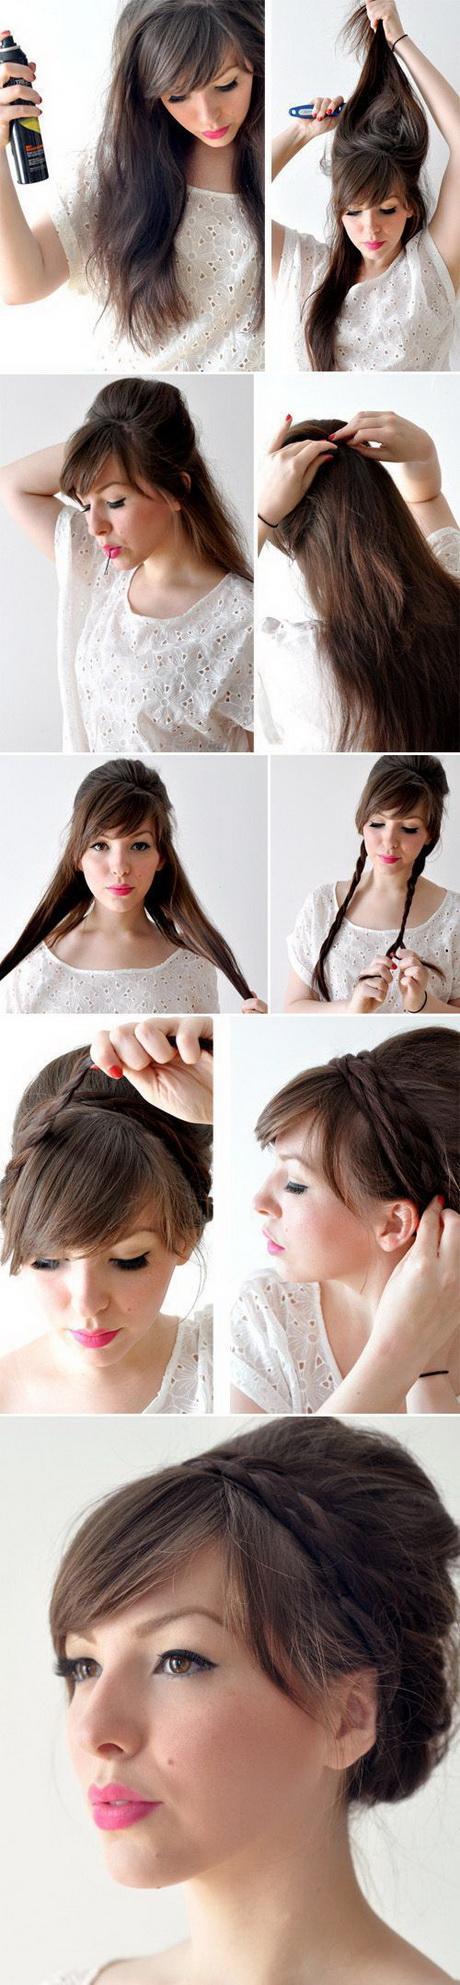 Hairstyles i can do at home